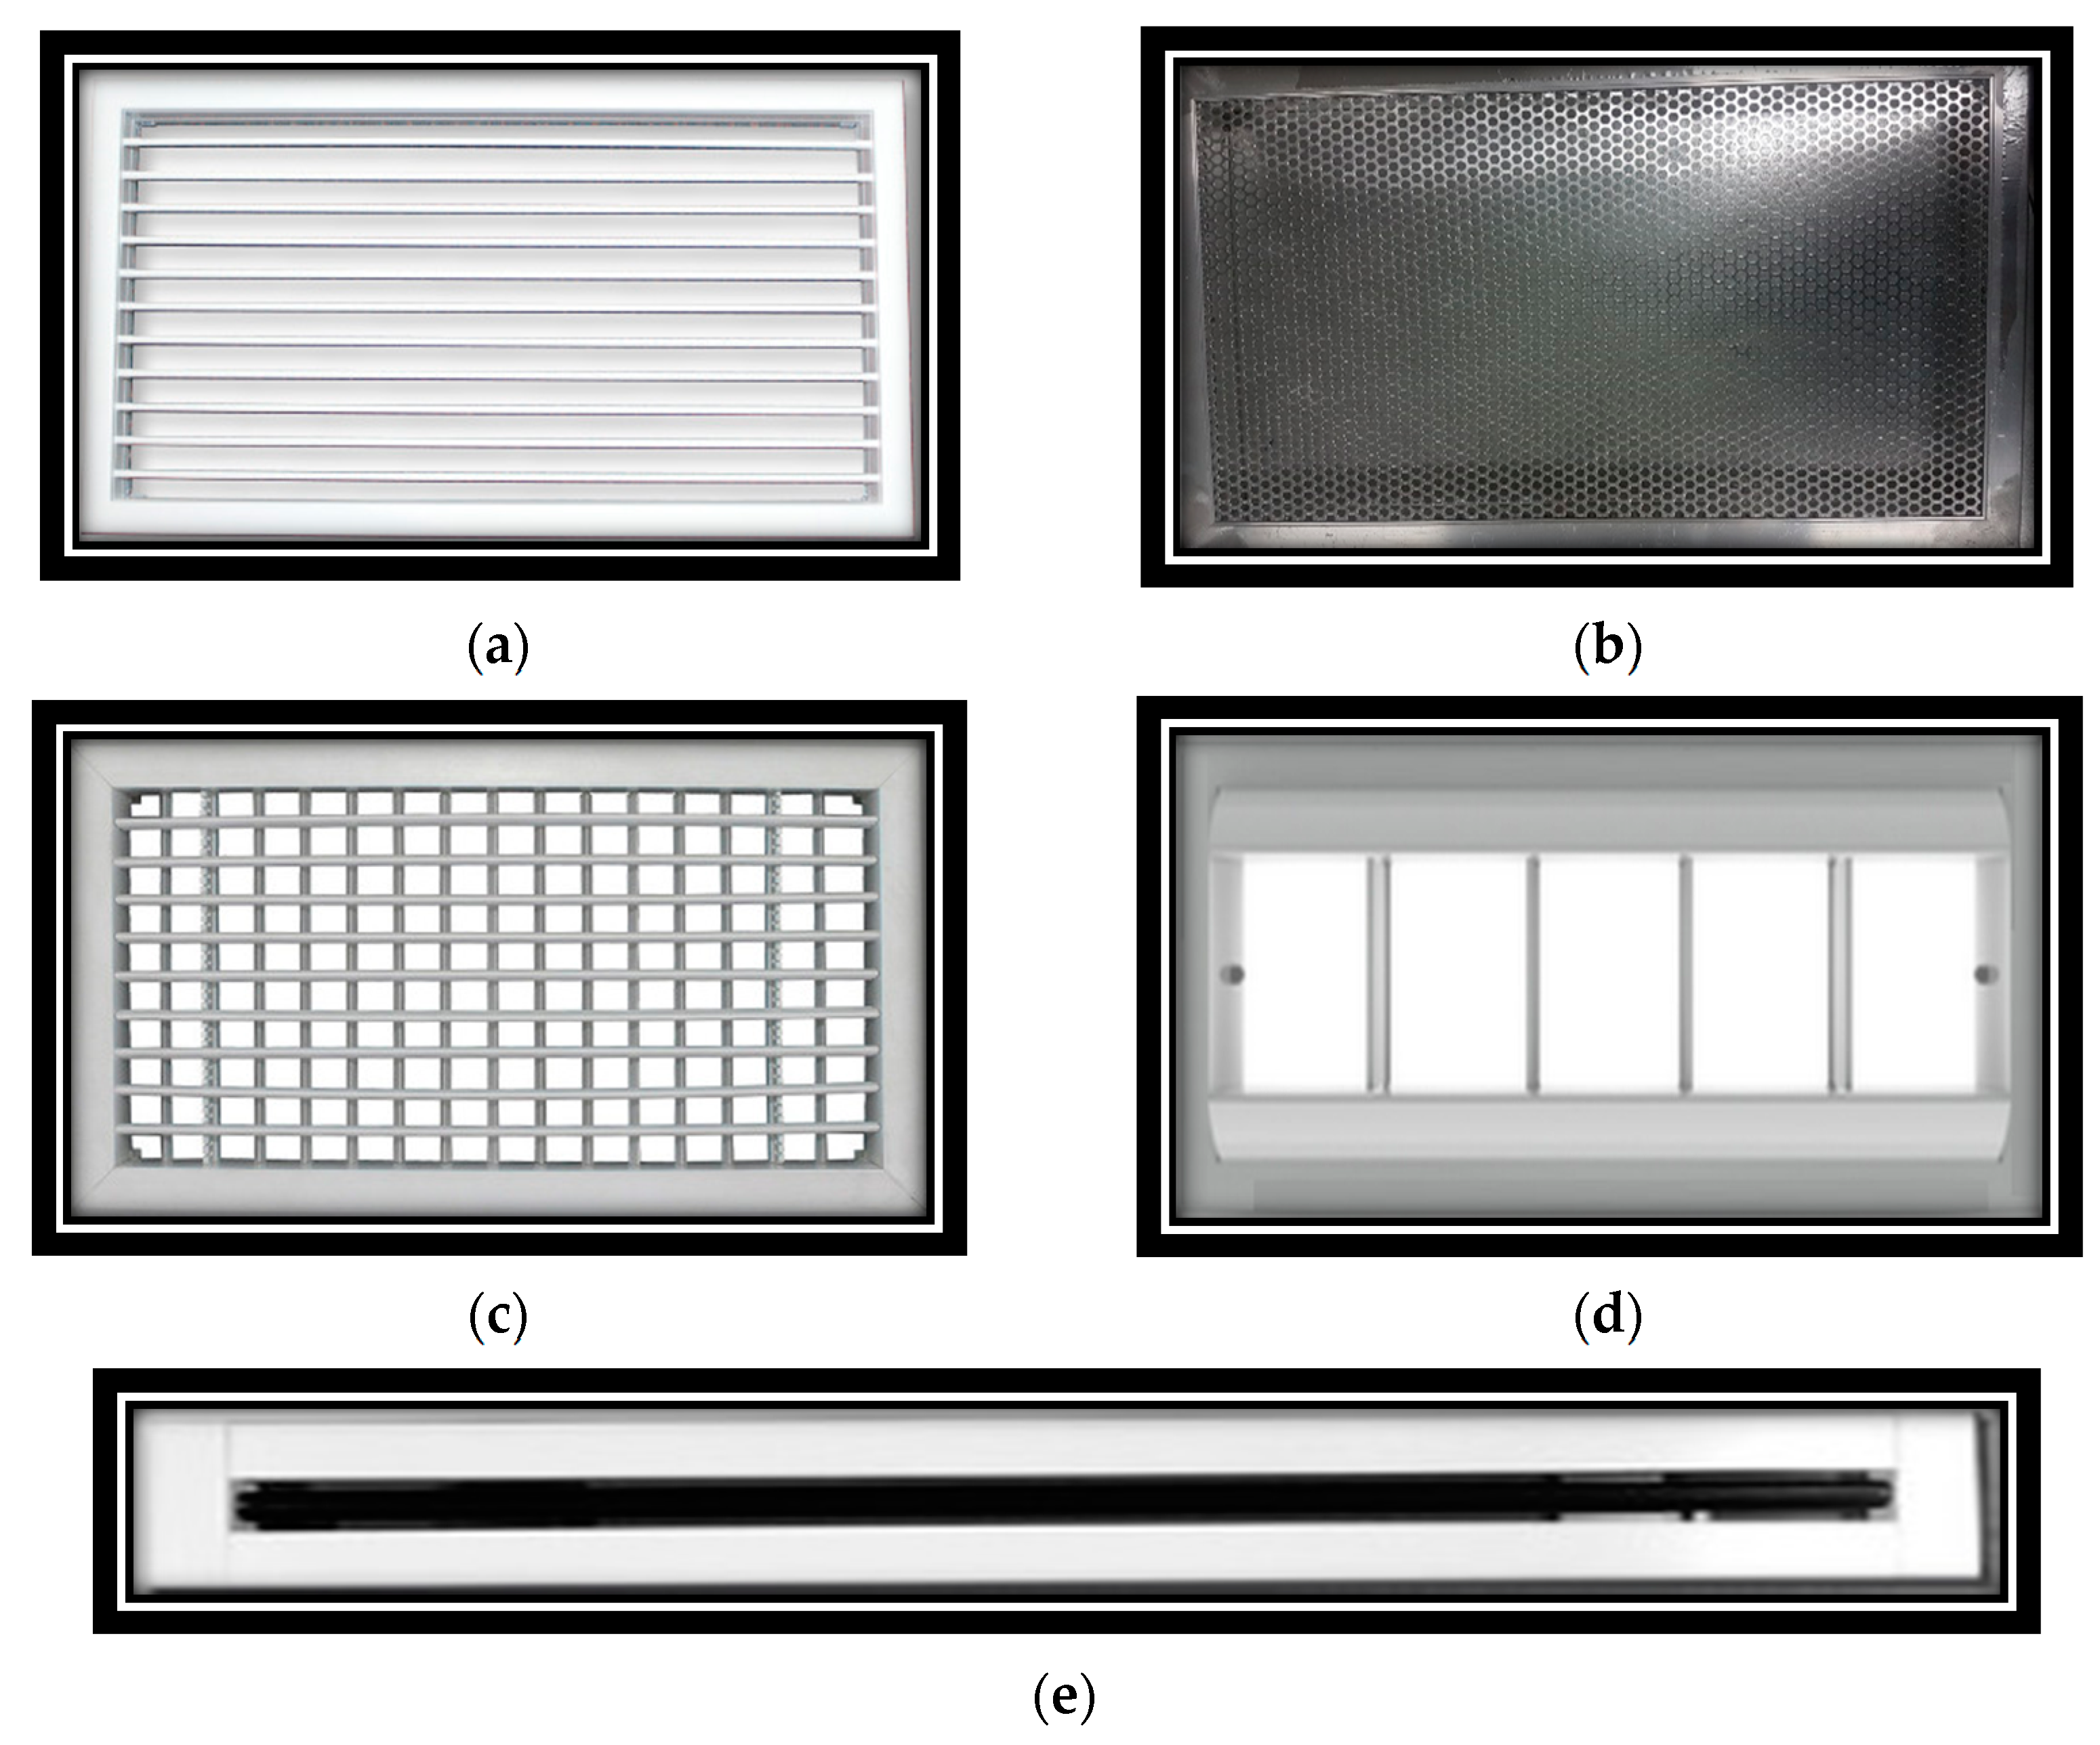 Continuous supply and return air grille in an ICU